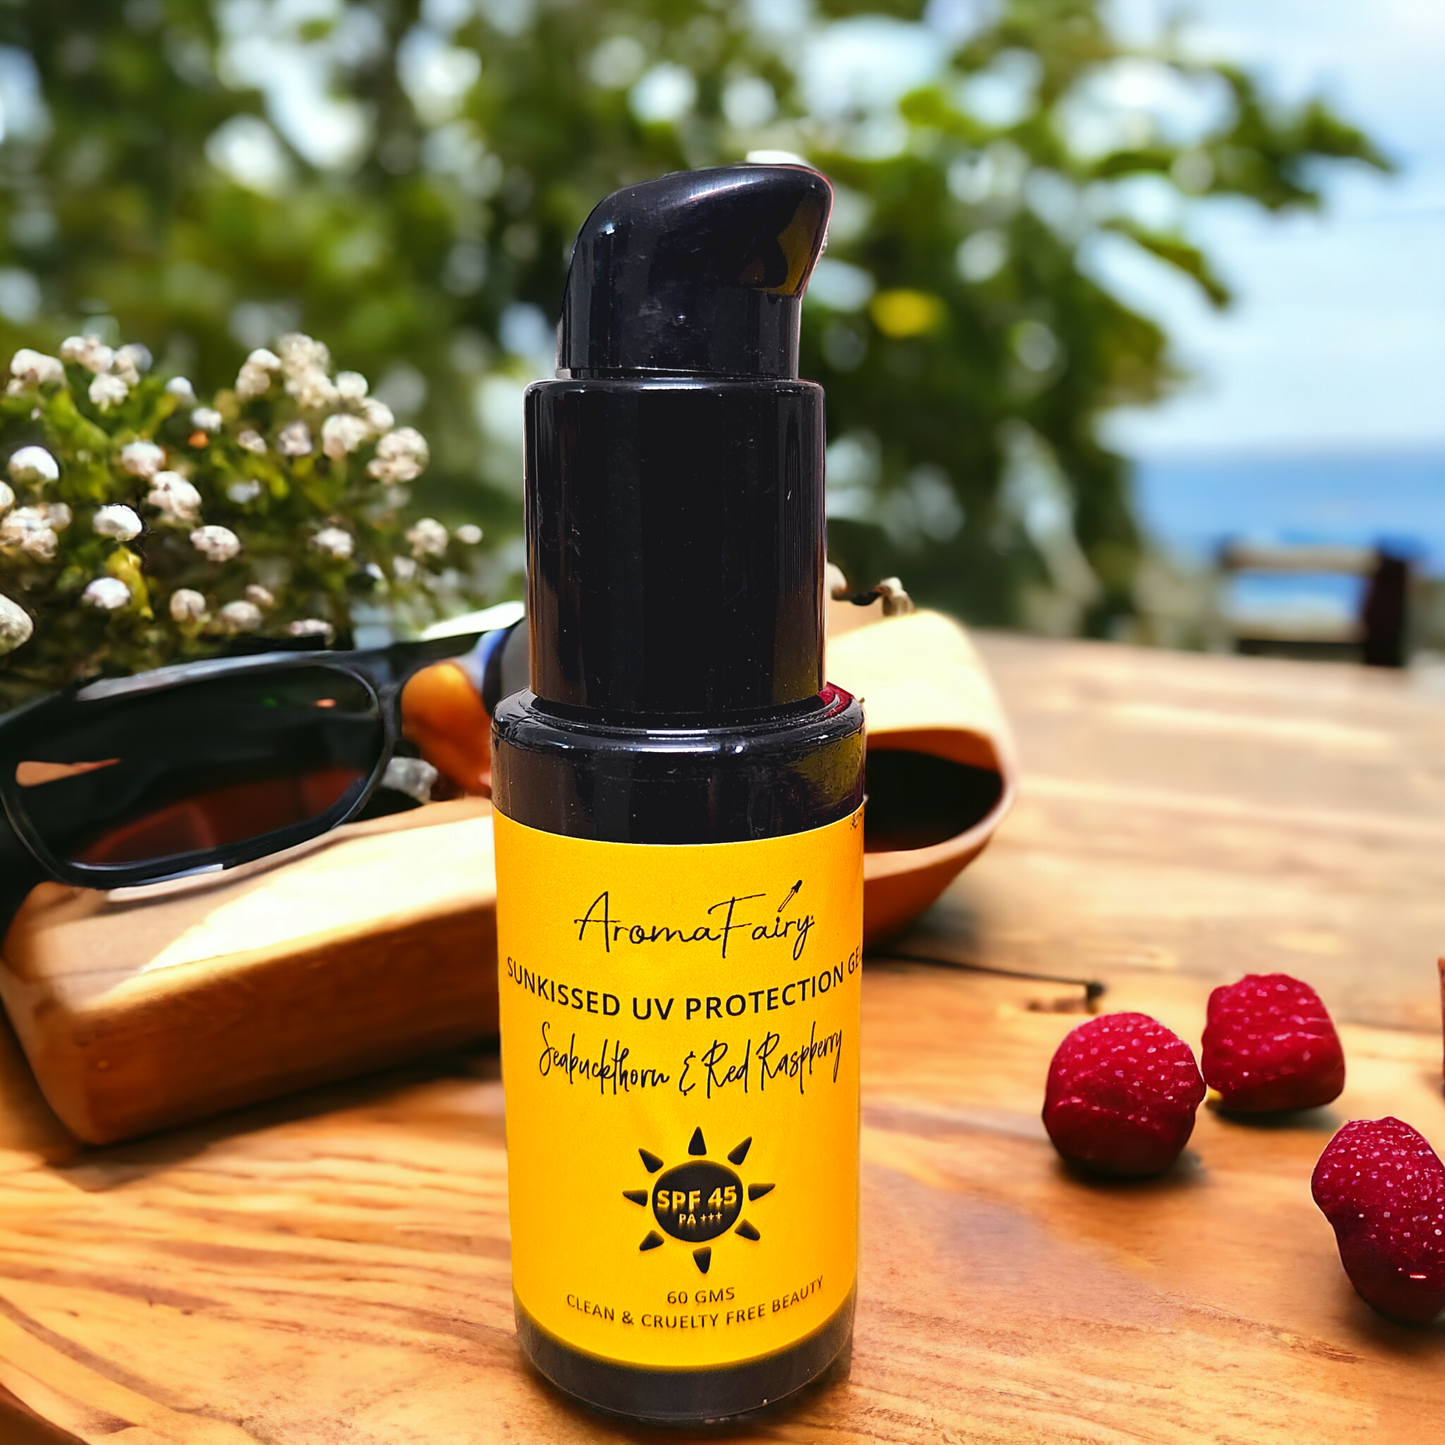 Sunkissed UV Protection Gel Sunscreen - SPF 45 PA+++